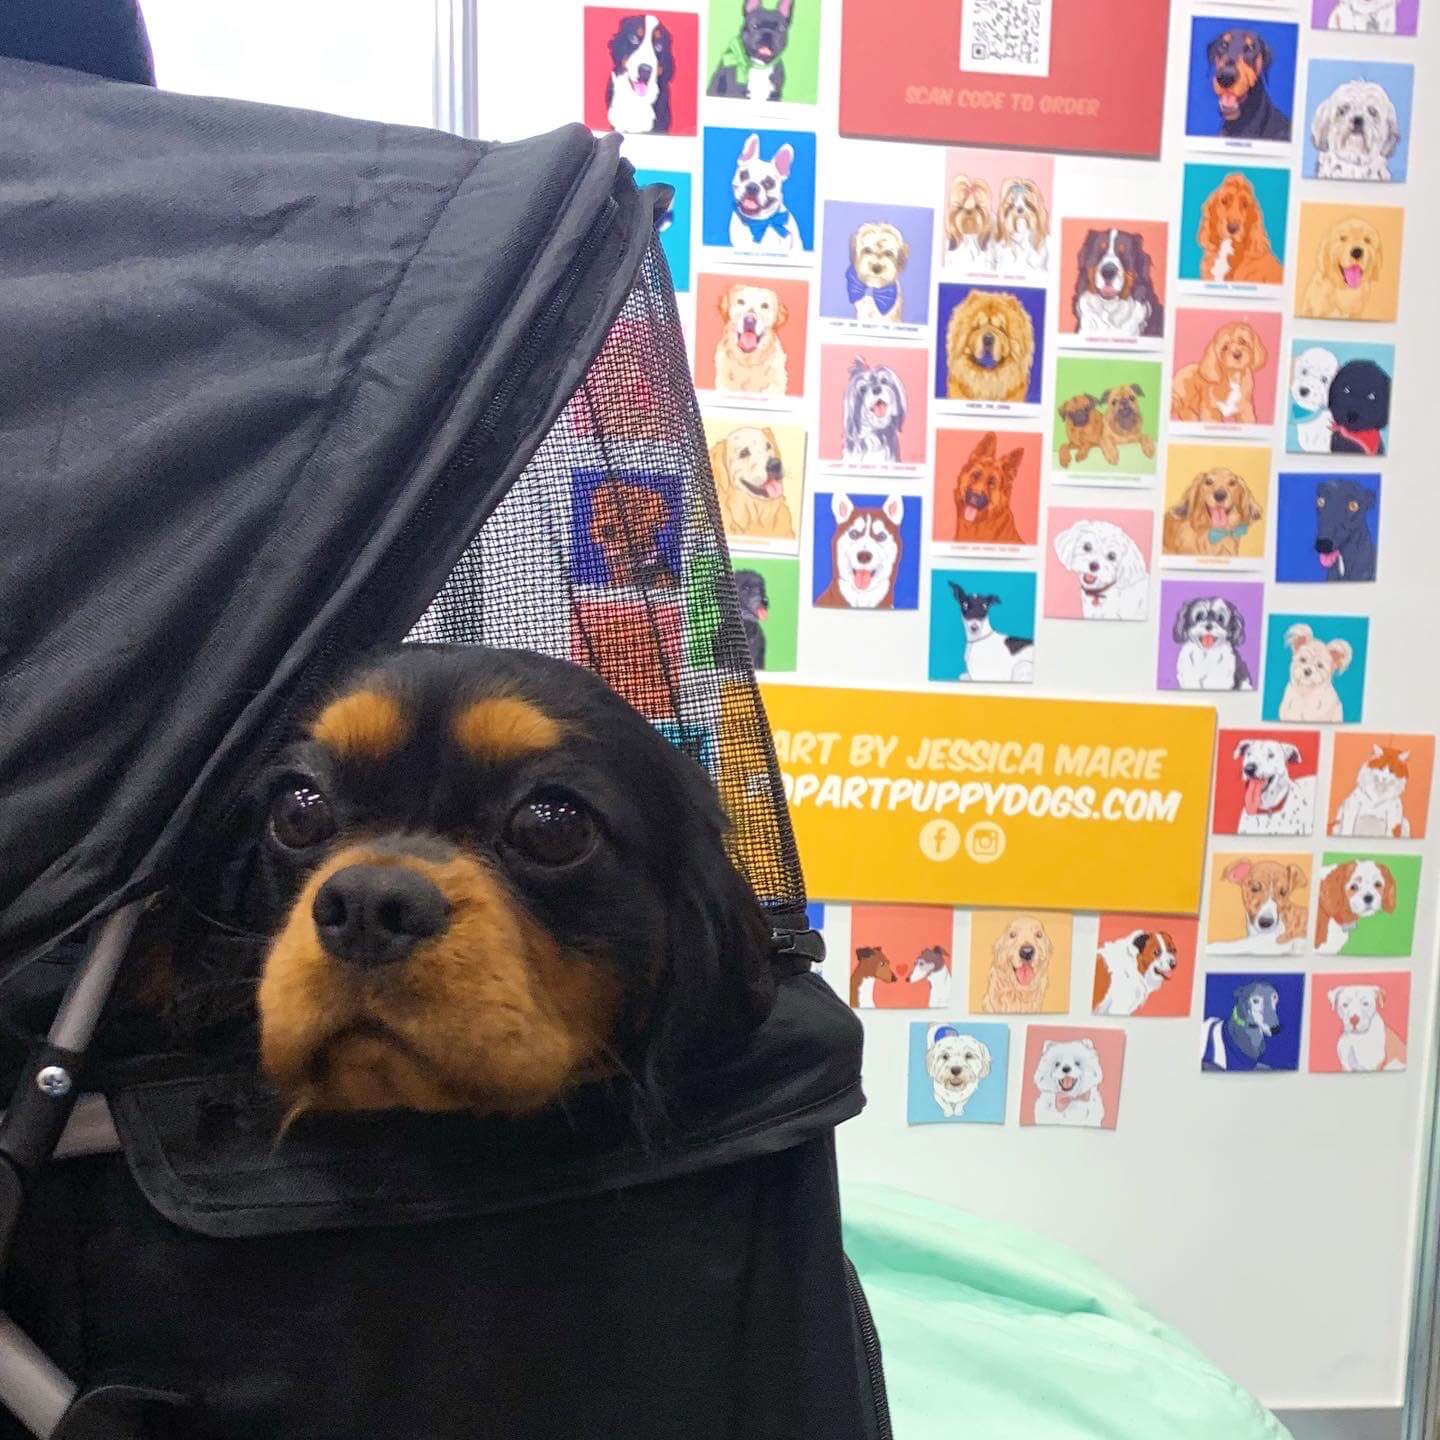 Puddles @puddlesthecavalier Dog Lovers Show Melbourne 2022 | Pop Art Puppy Dogs